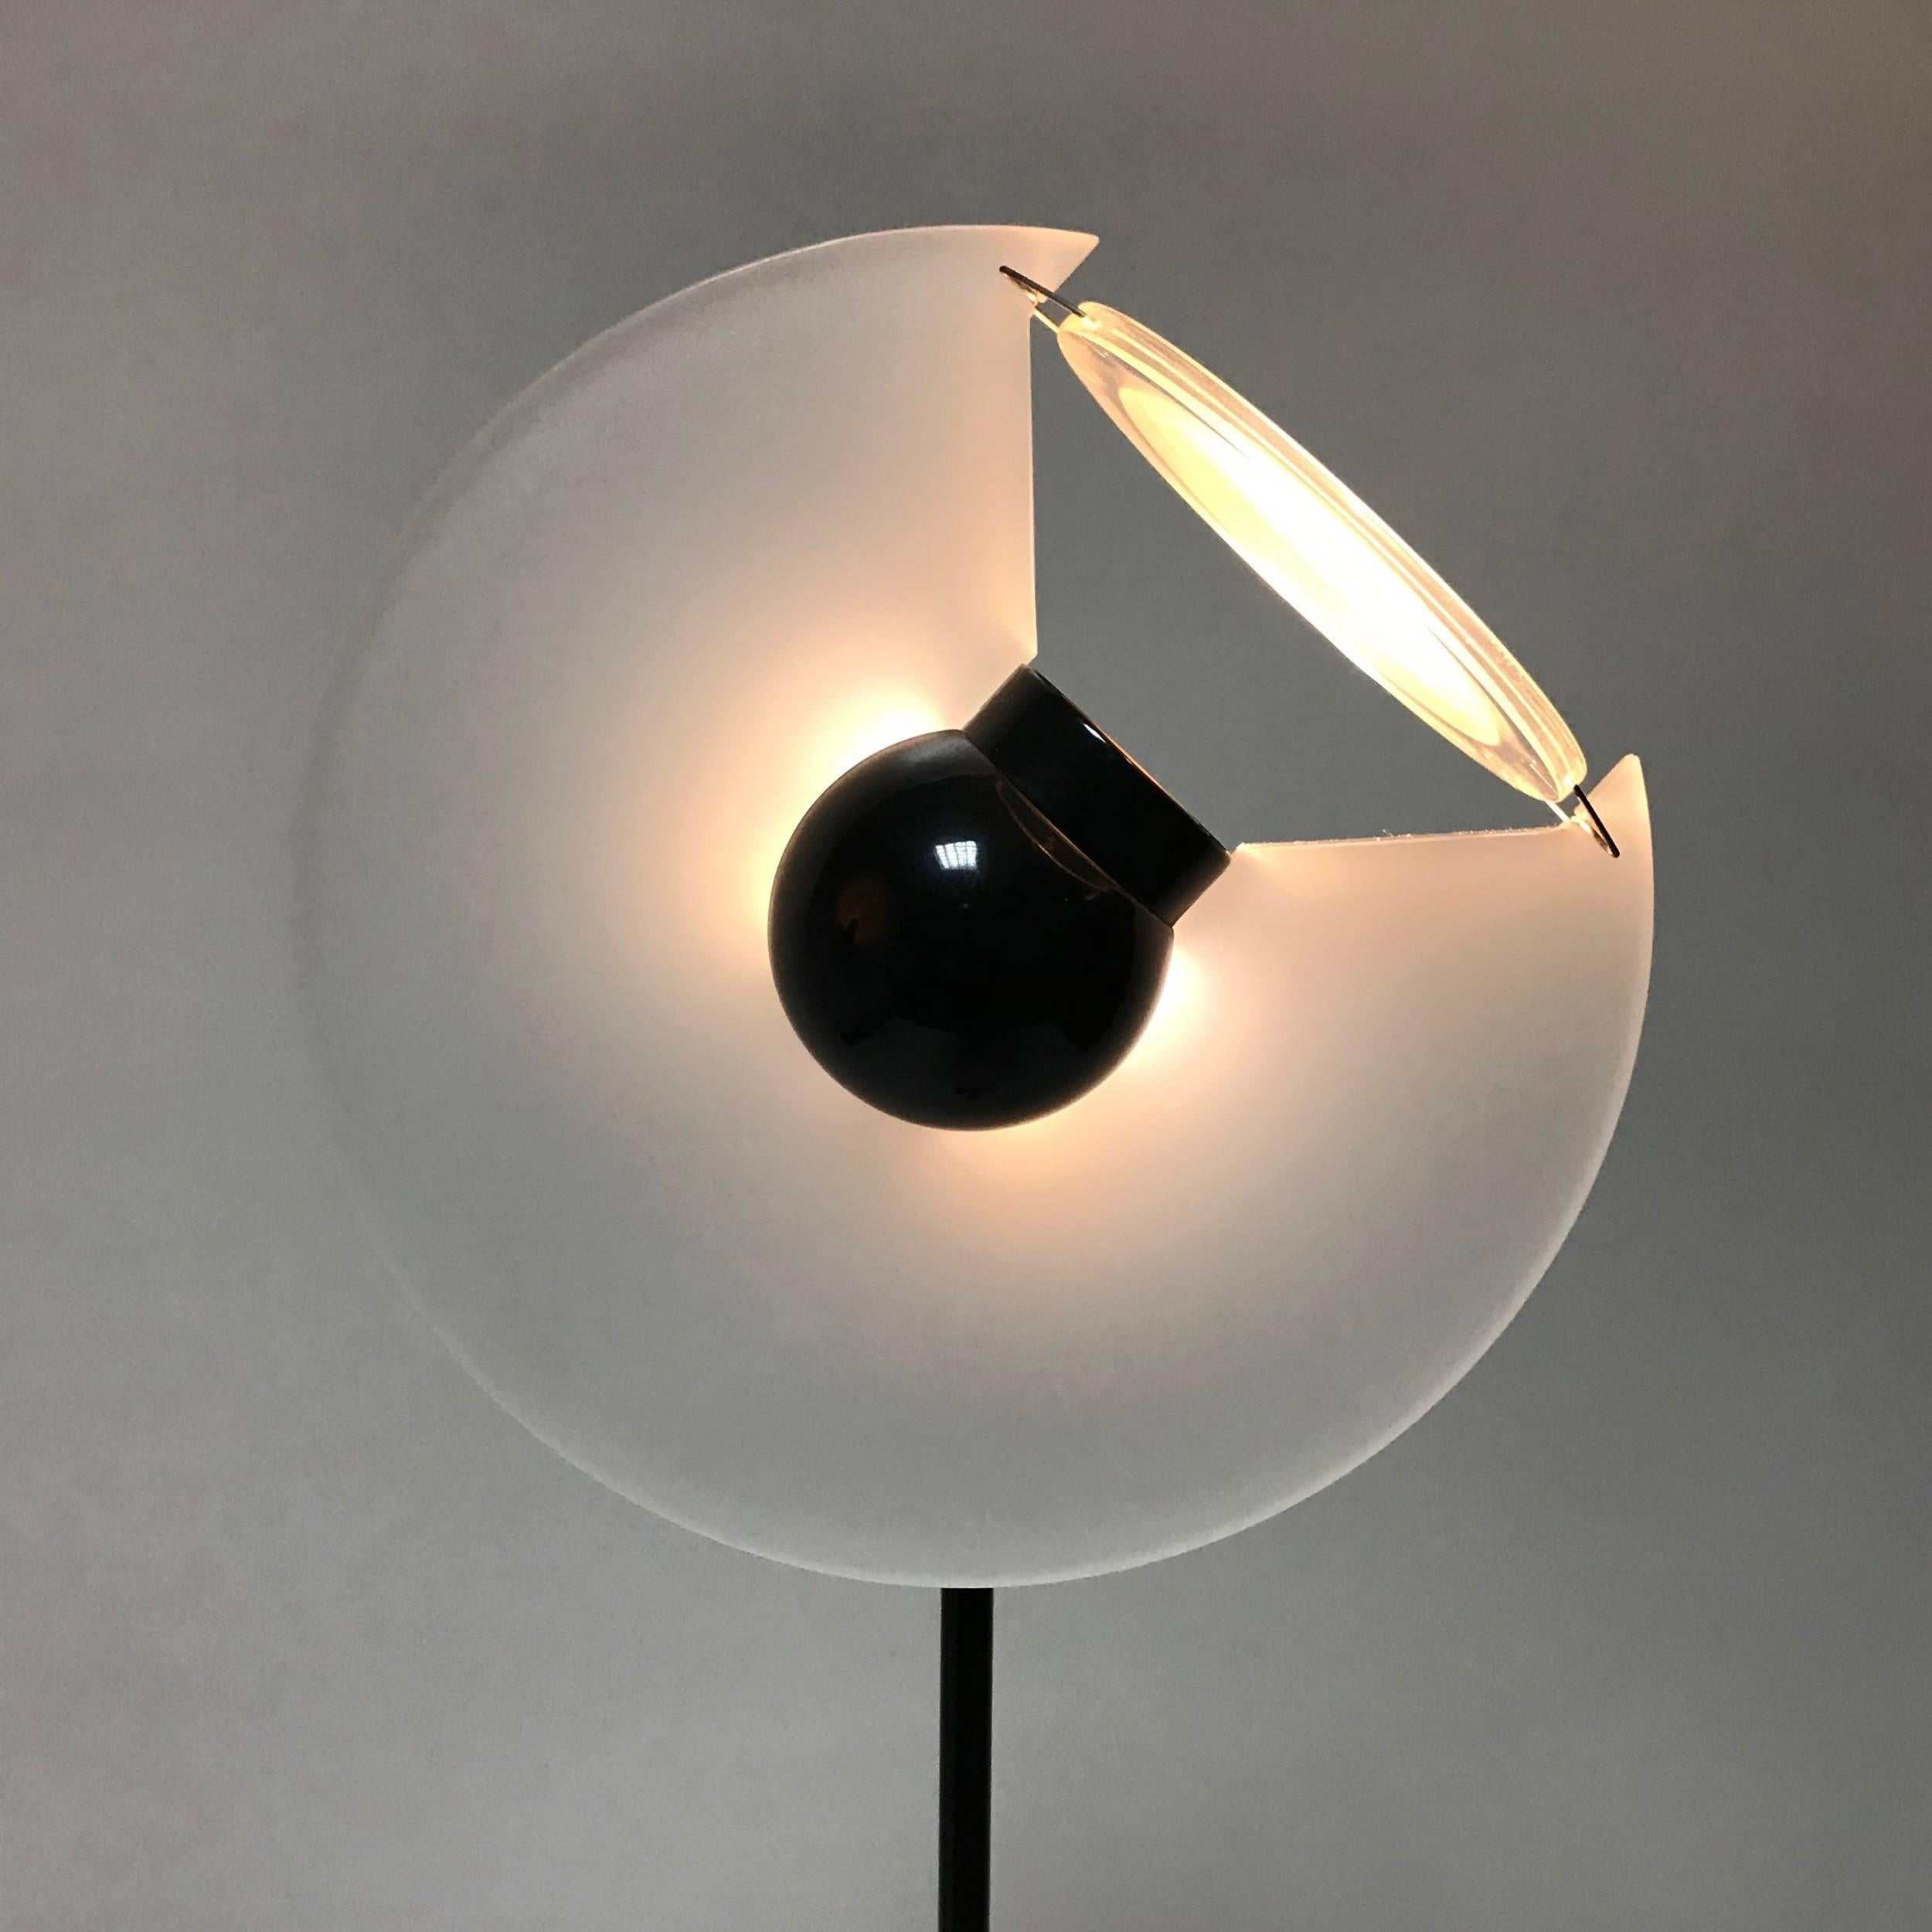 This 'Club' floor lamp was designed by Pier Giuseppe Ramella for Arteluce and was produced in Italy in 1983. This floor lamp of metal a white lacquered circular conical base and a black metal in height adjustable column on which is set an adjustable